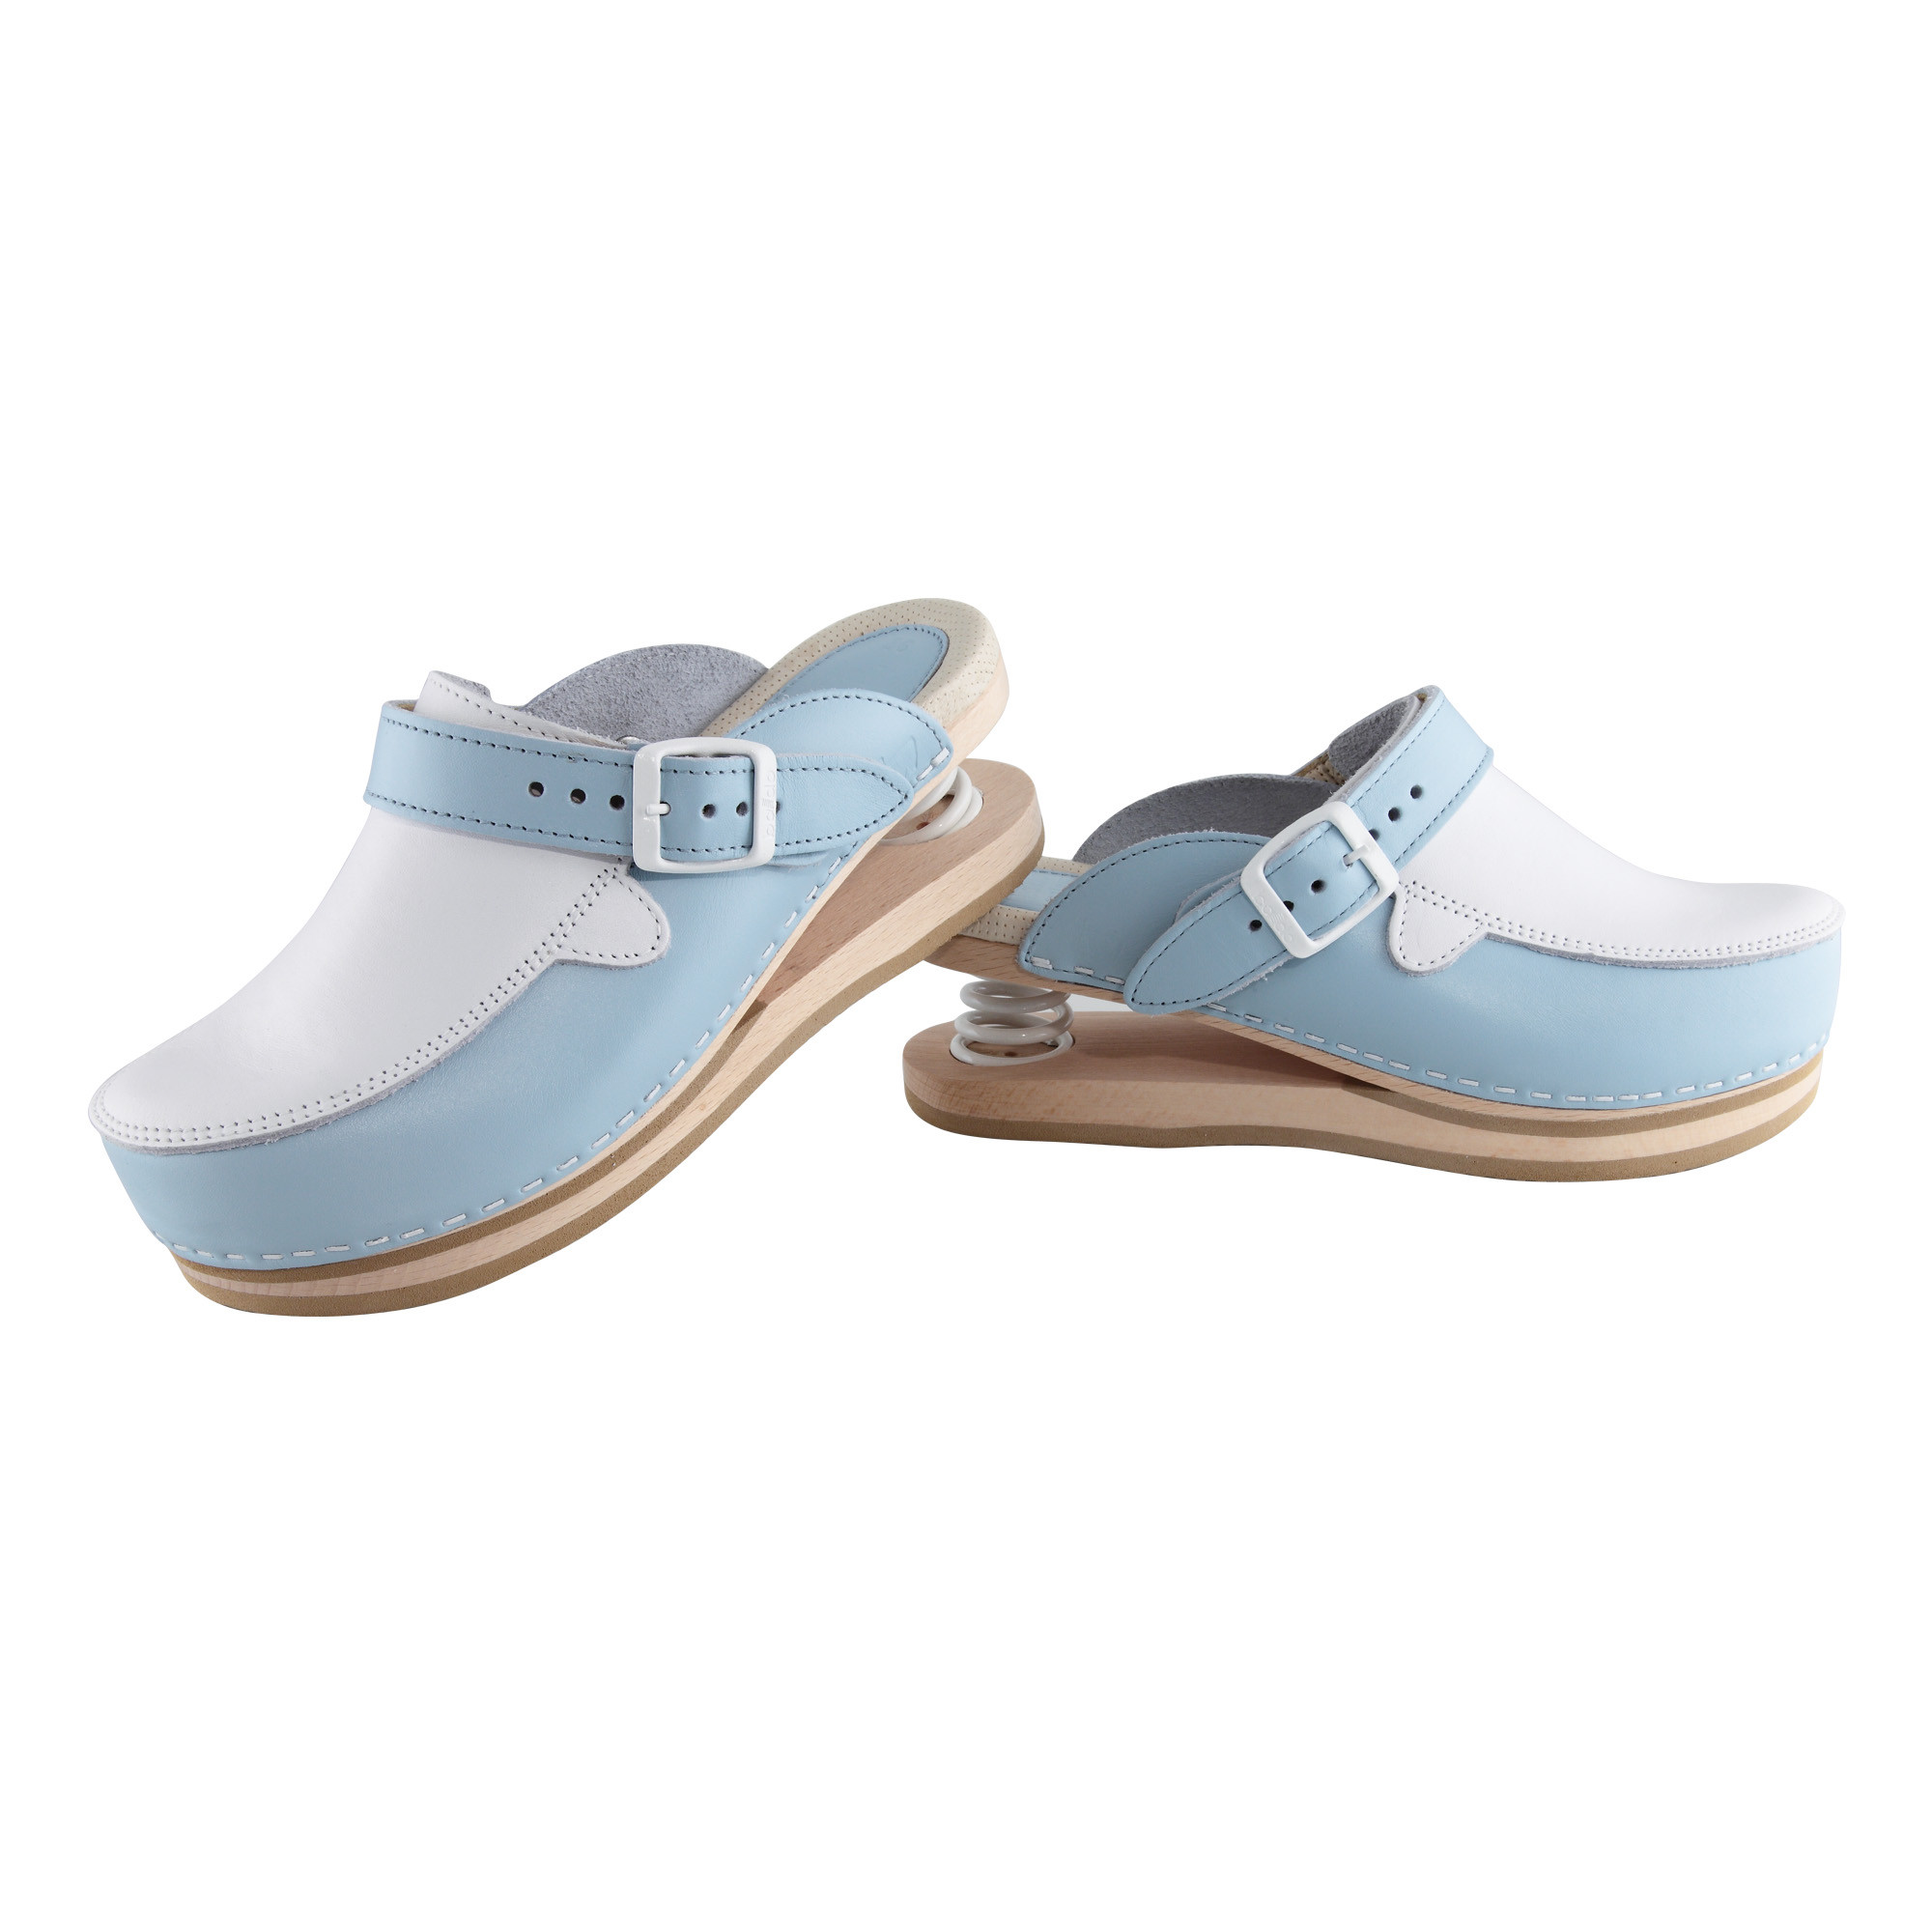 Relax clogs closed with blue spring Size 38